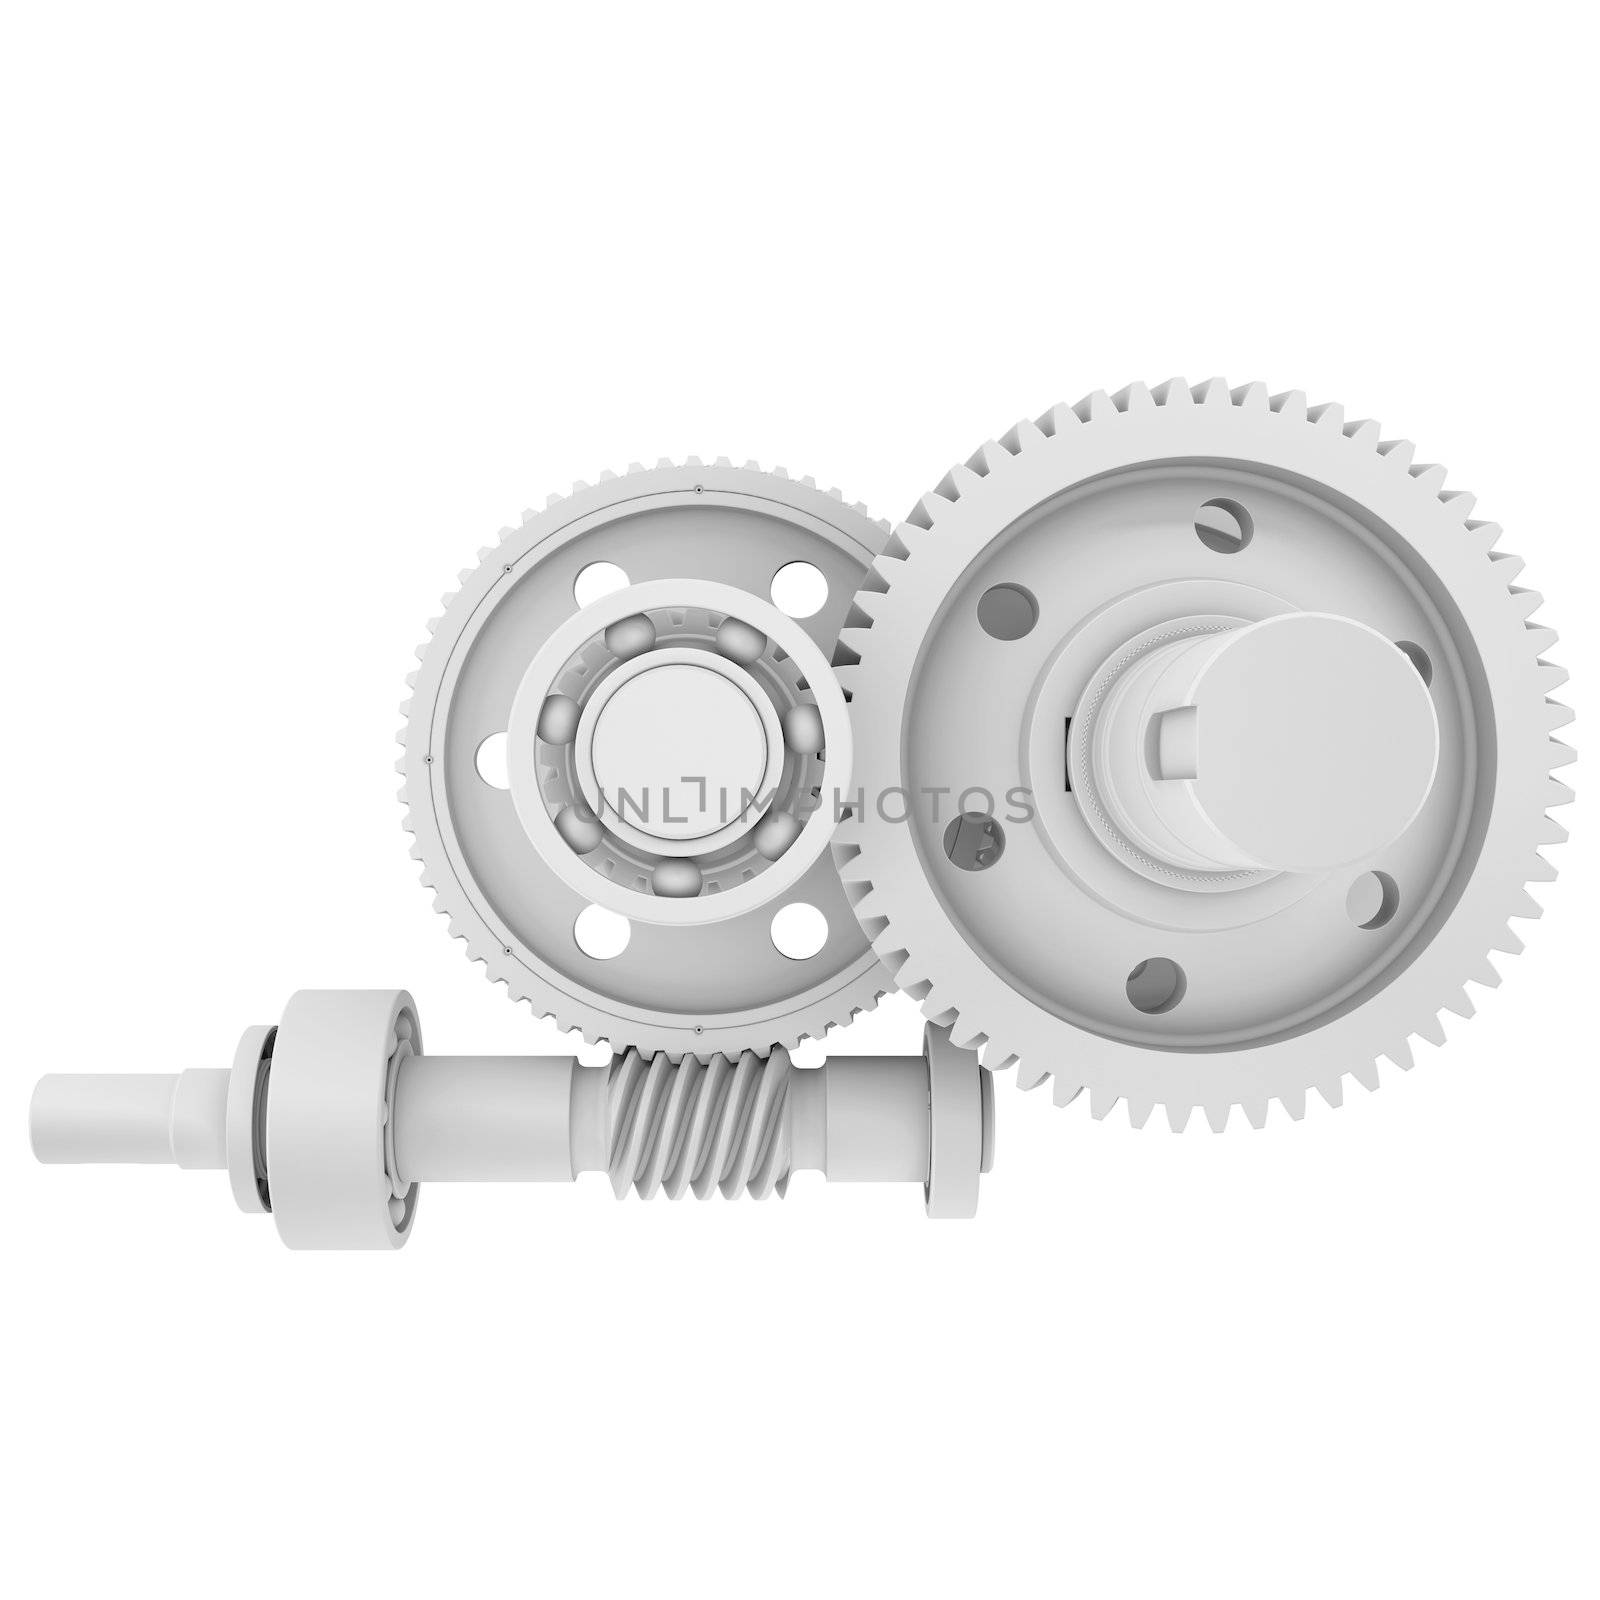 White shafts, gears and bearings by cherezoff